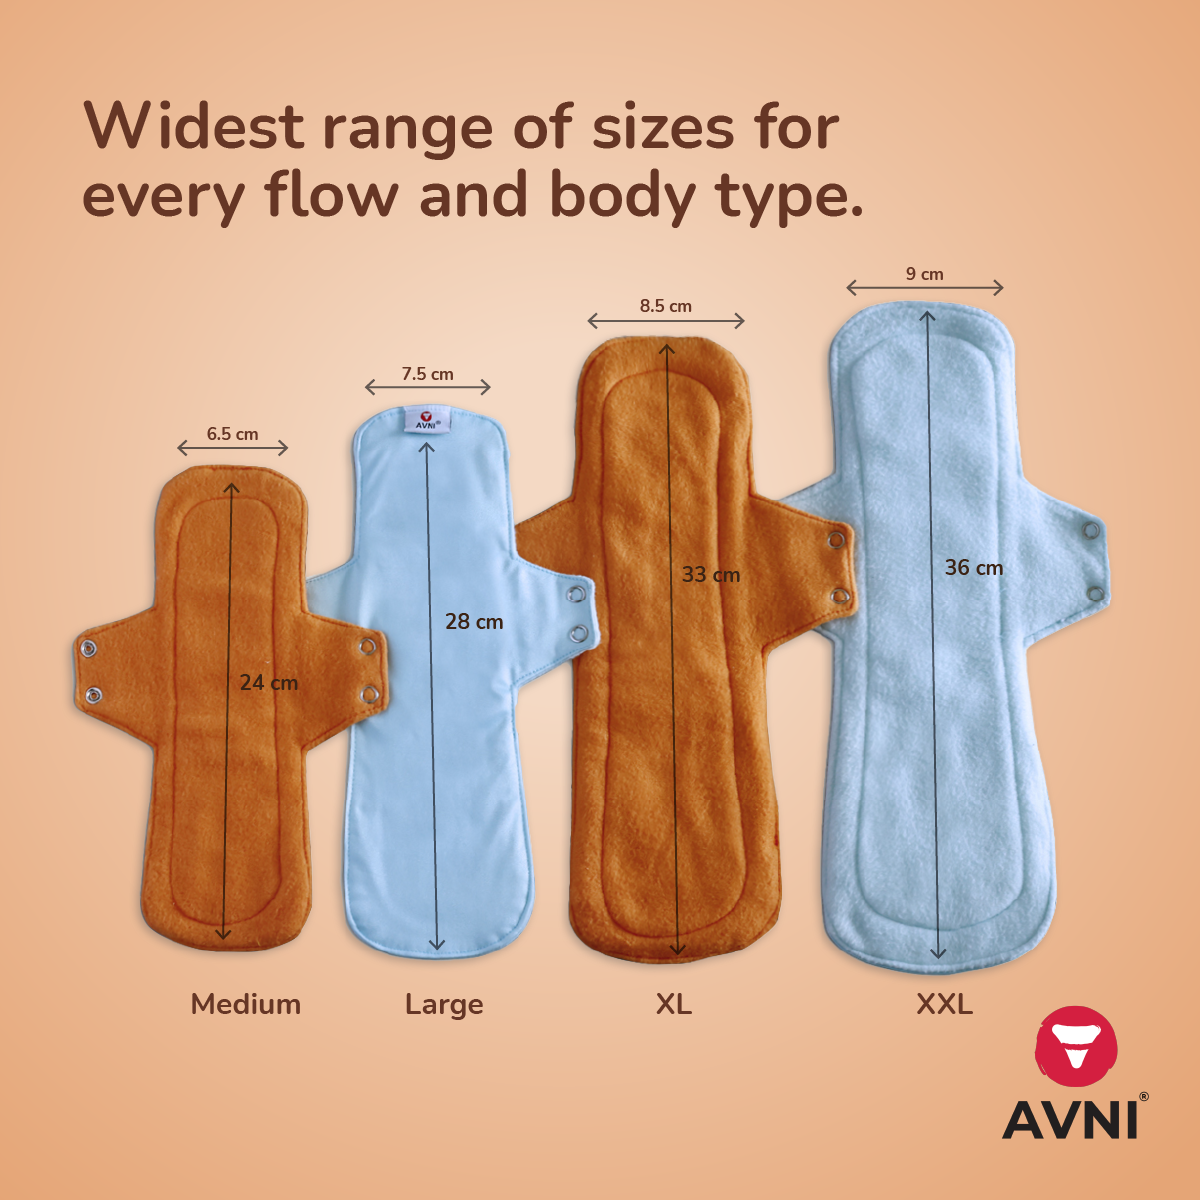 Fluff Reusable Cloth Sanitary Pads - Polyester Fabric [2 pads]